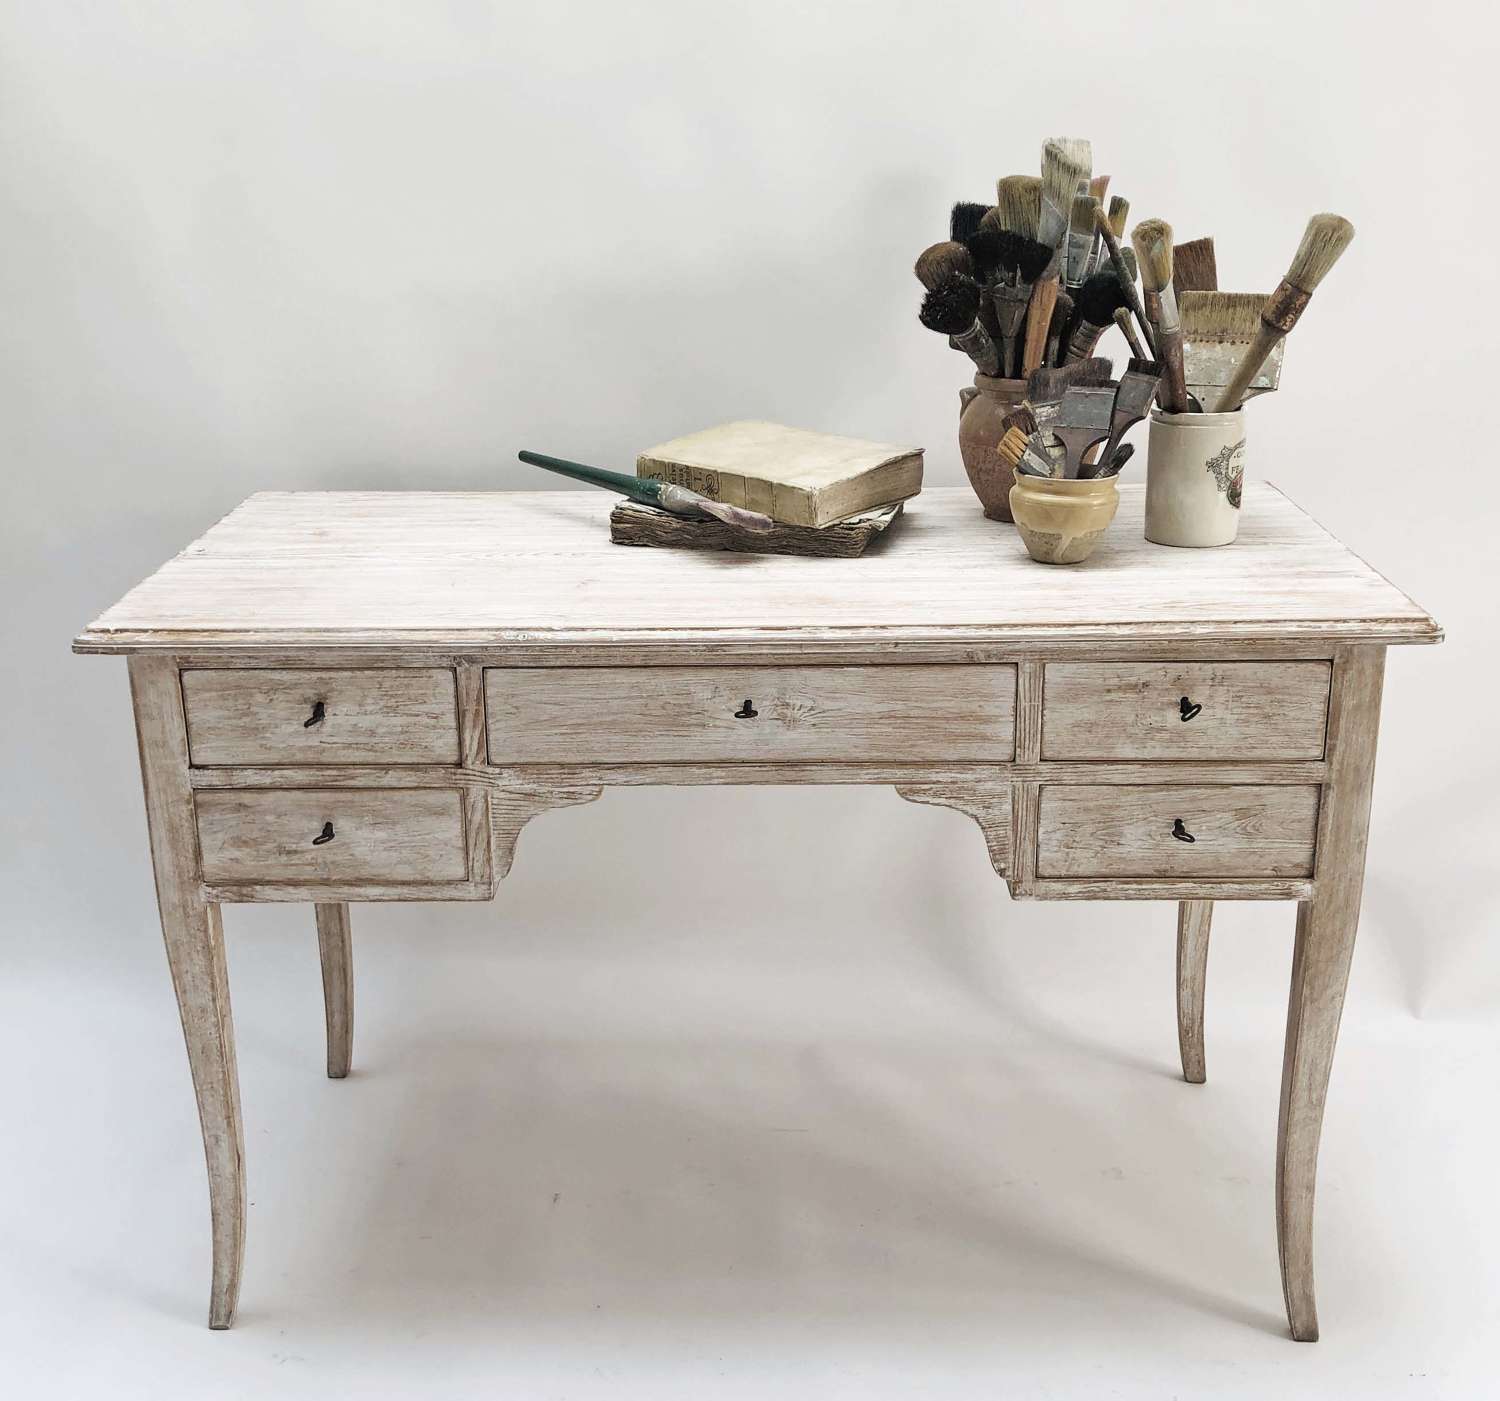 20th c Swedish Pine Desk with Lime Wash